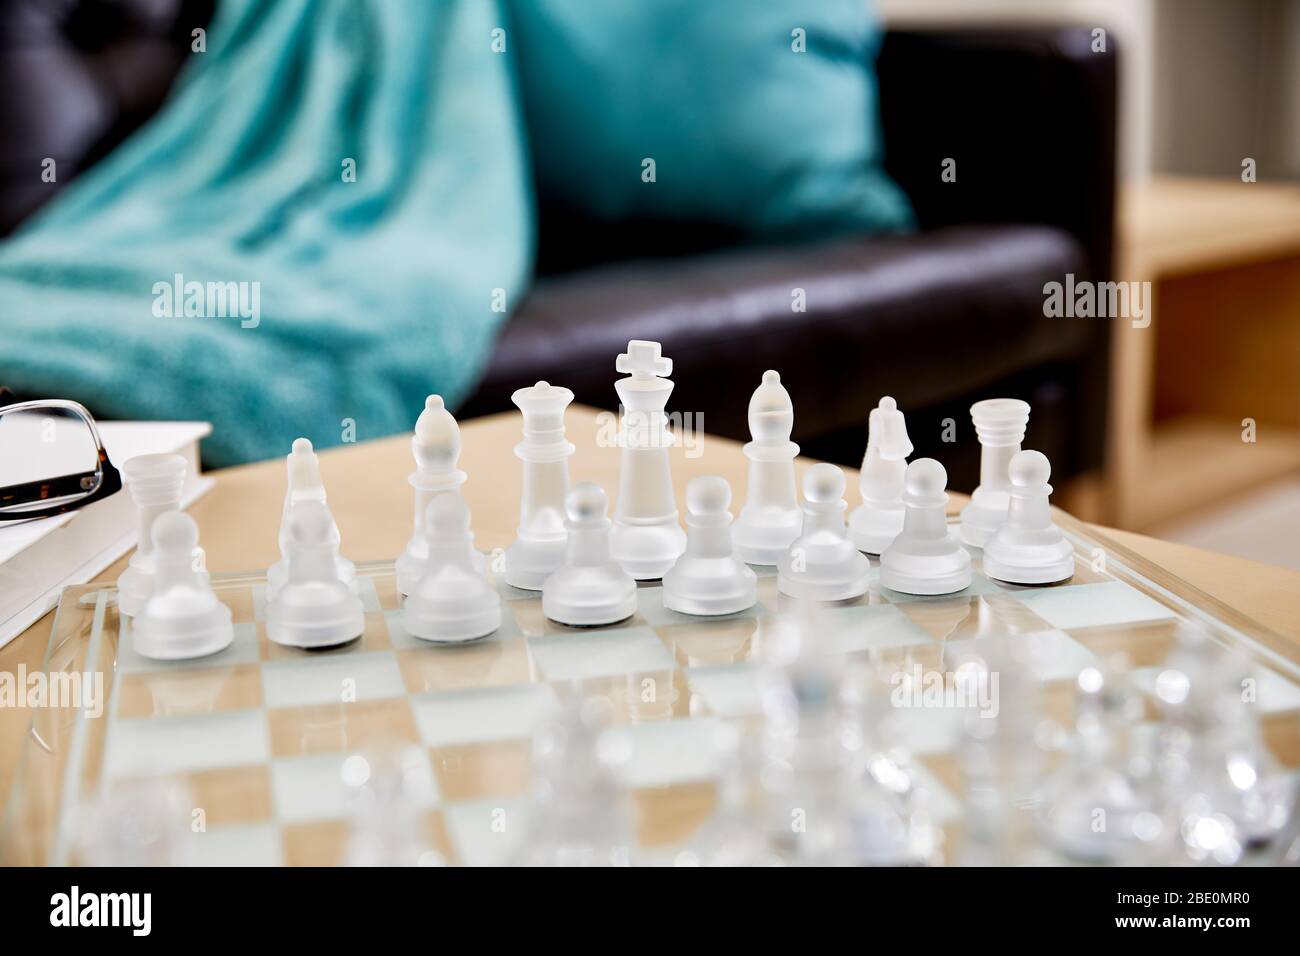 Close up of frosted glass chess pieces on a glass chess board in a living room with reading glasses and a hardcover book and shallow depth of field Stock Photo